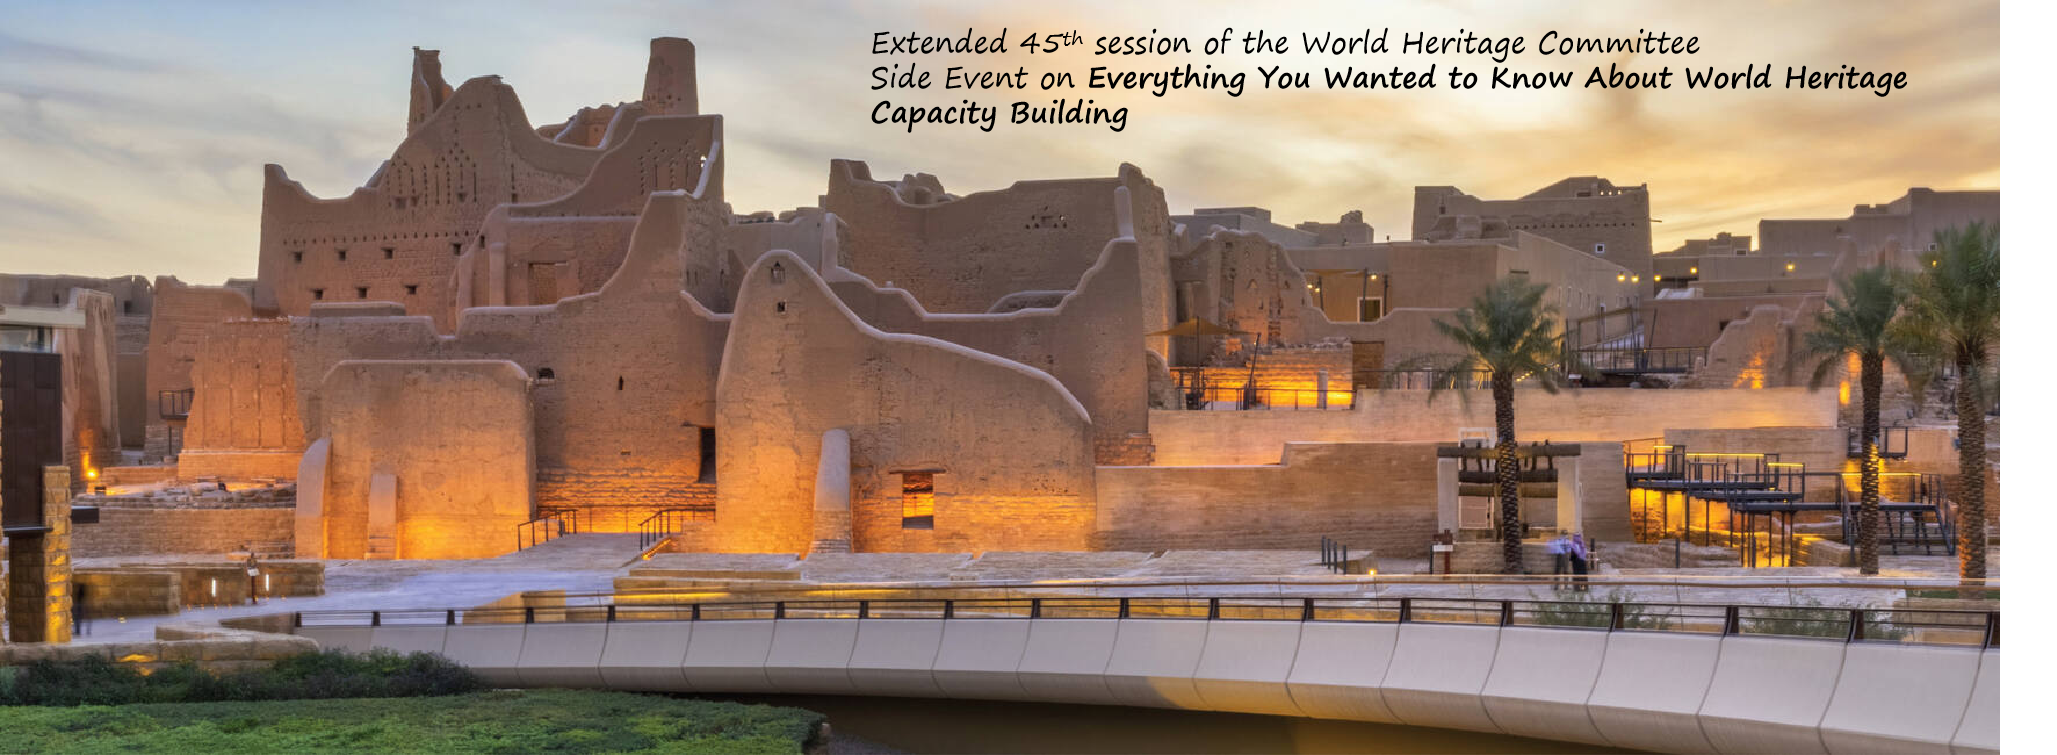 WHITRAP co-hosted at the side event on the Everything You Wanted to Know About World Heritage Capacity Building